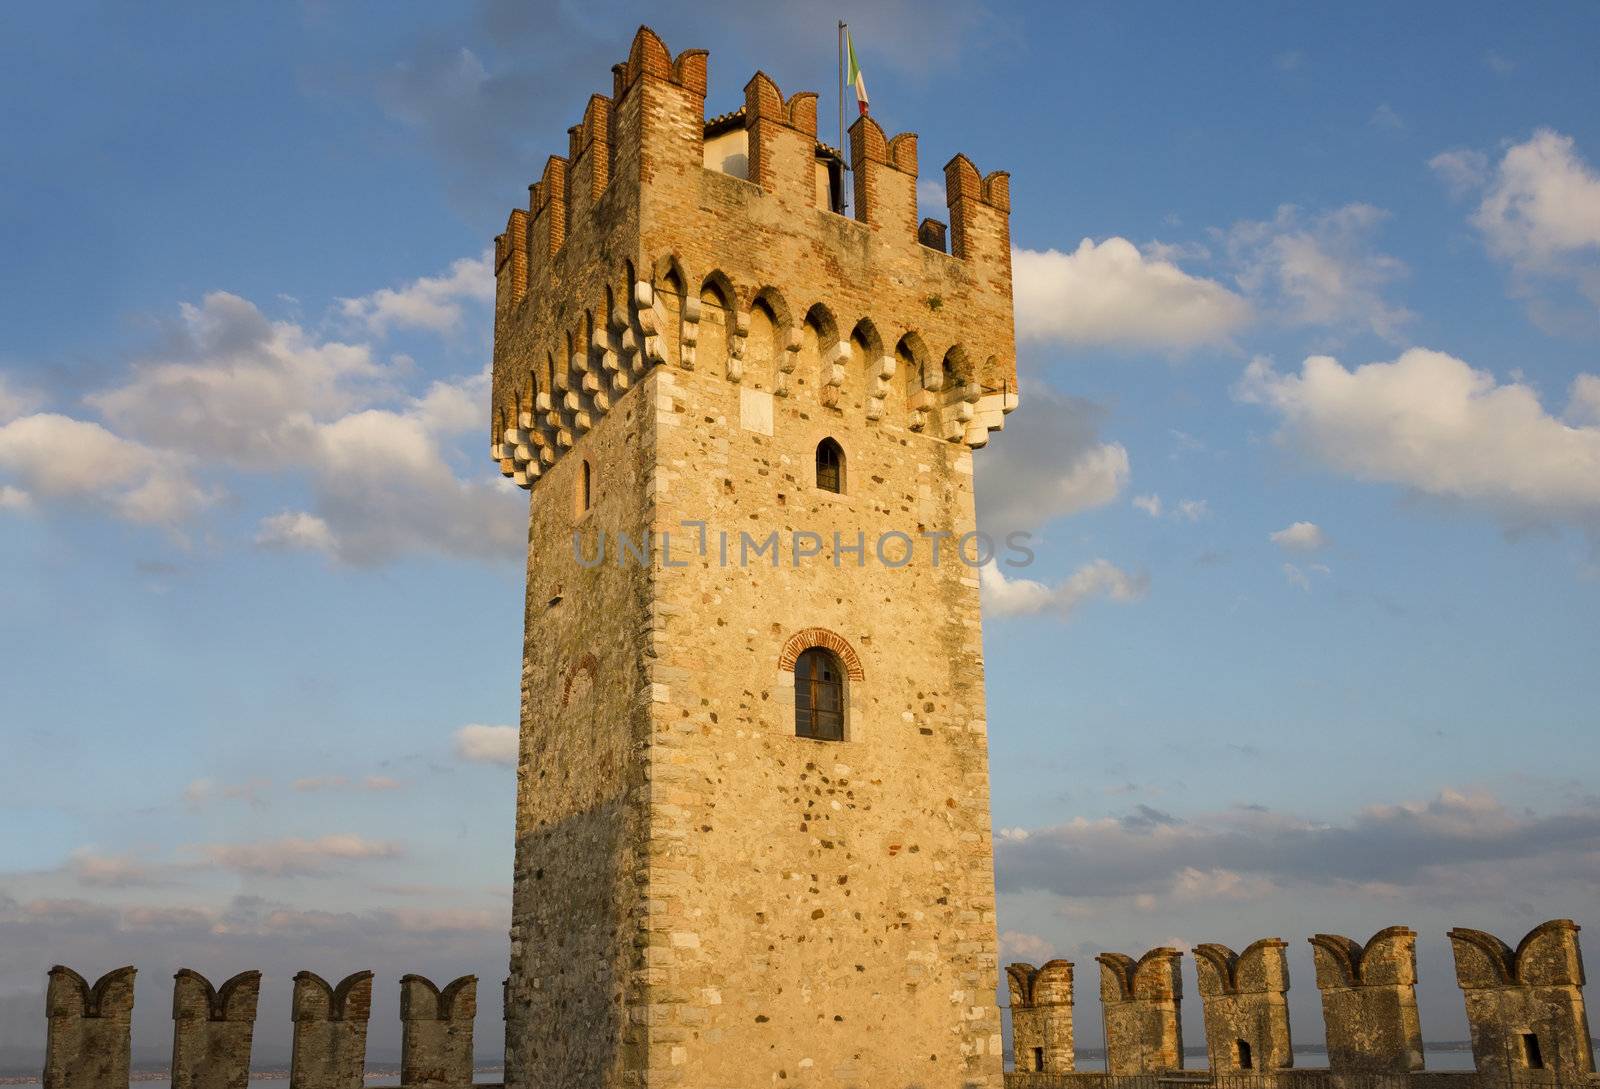 Close up shot of the Tower of Scaliger Fortress in Sirmione, Italy in the warm light of the sunset with colorful clouds over the blue sky. 